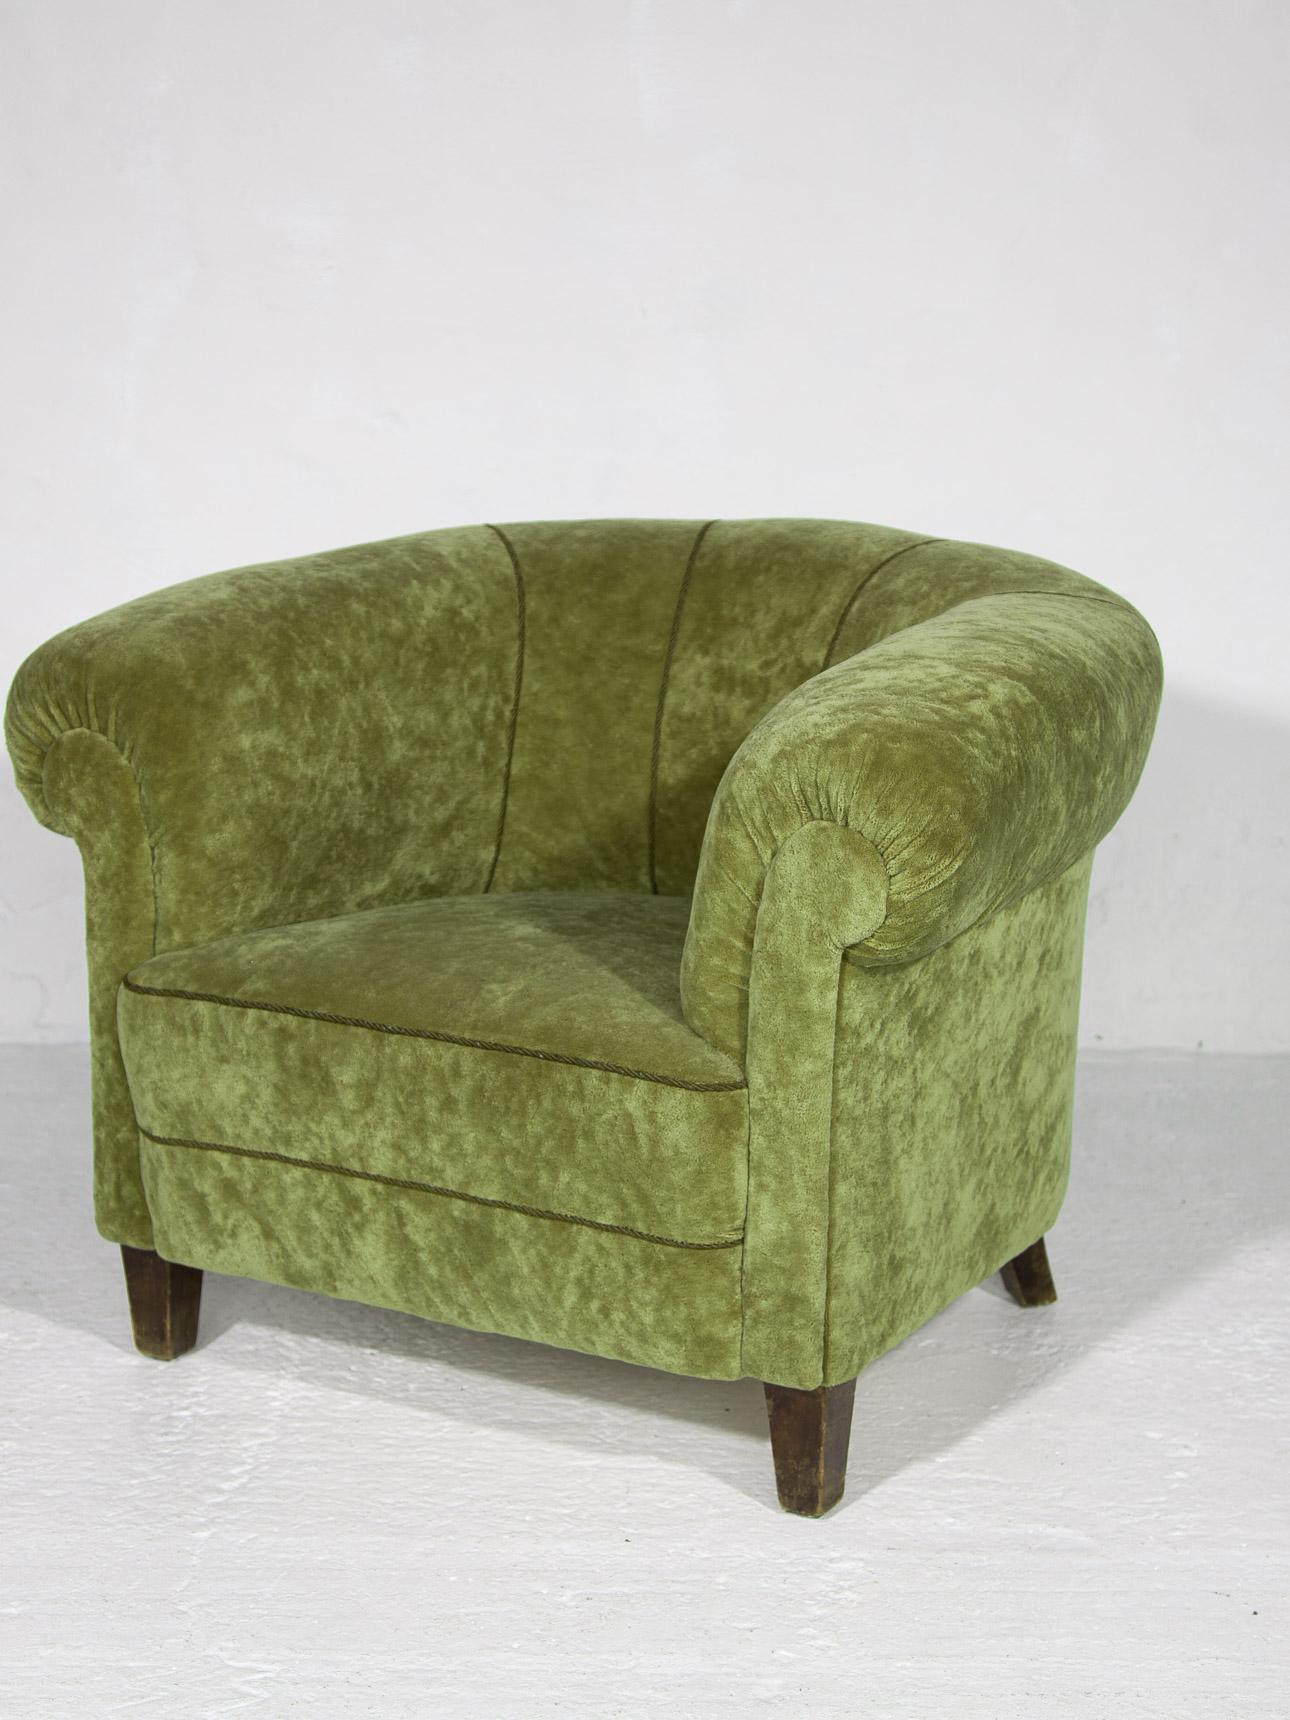 French Art Deco Lounge Chairs in Green Olive Velvet Upholstery For Sale